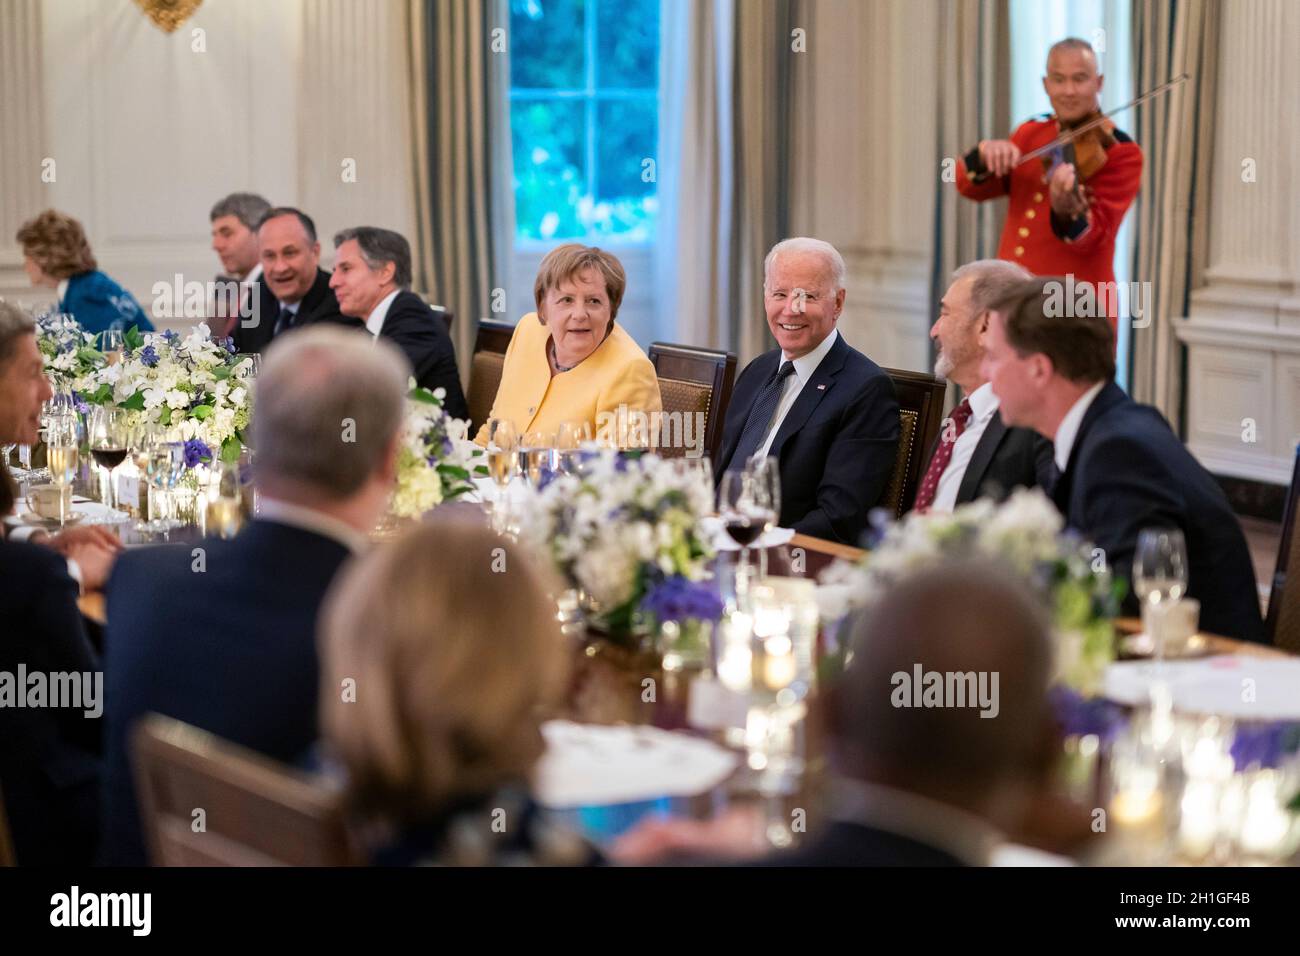 Washington, United States of America. 15 July, 2021. U.S President Joe Biden and First Lady Jill Biden, joined by Vice President Kamala Harris, Second Gentleman Douglas Emhoff, and invited guests, host a dinner for German Chancellor Angela Merkel and her husband Professor Joachim Sauer  in the State Dining Room of the White House July 15, 2021in Washington, D.C. Credit: Adam Schultz/White House Photo/Alamy Live News Stock Photo